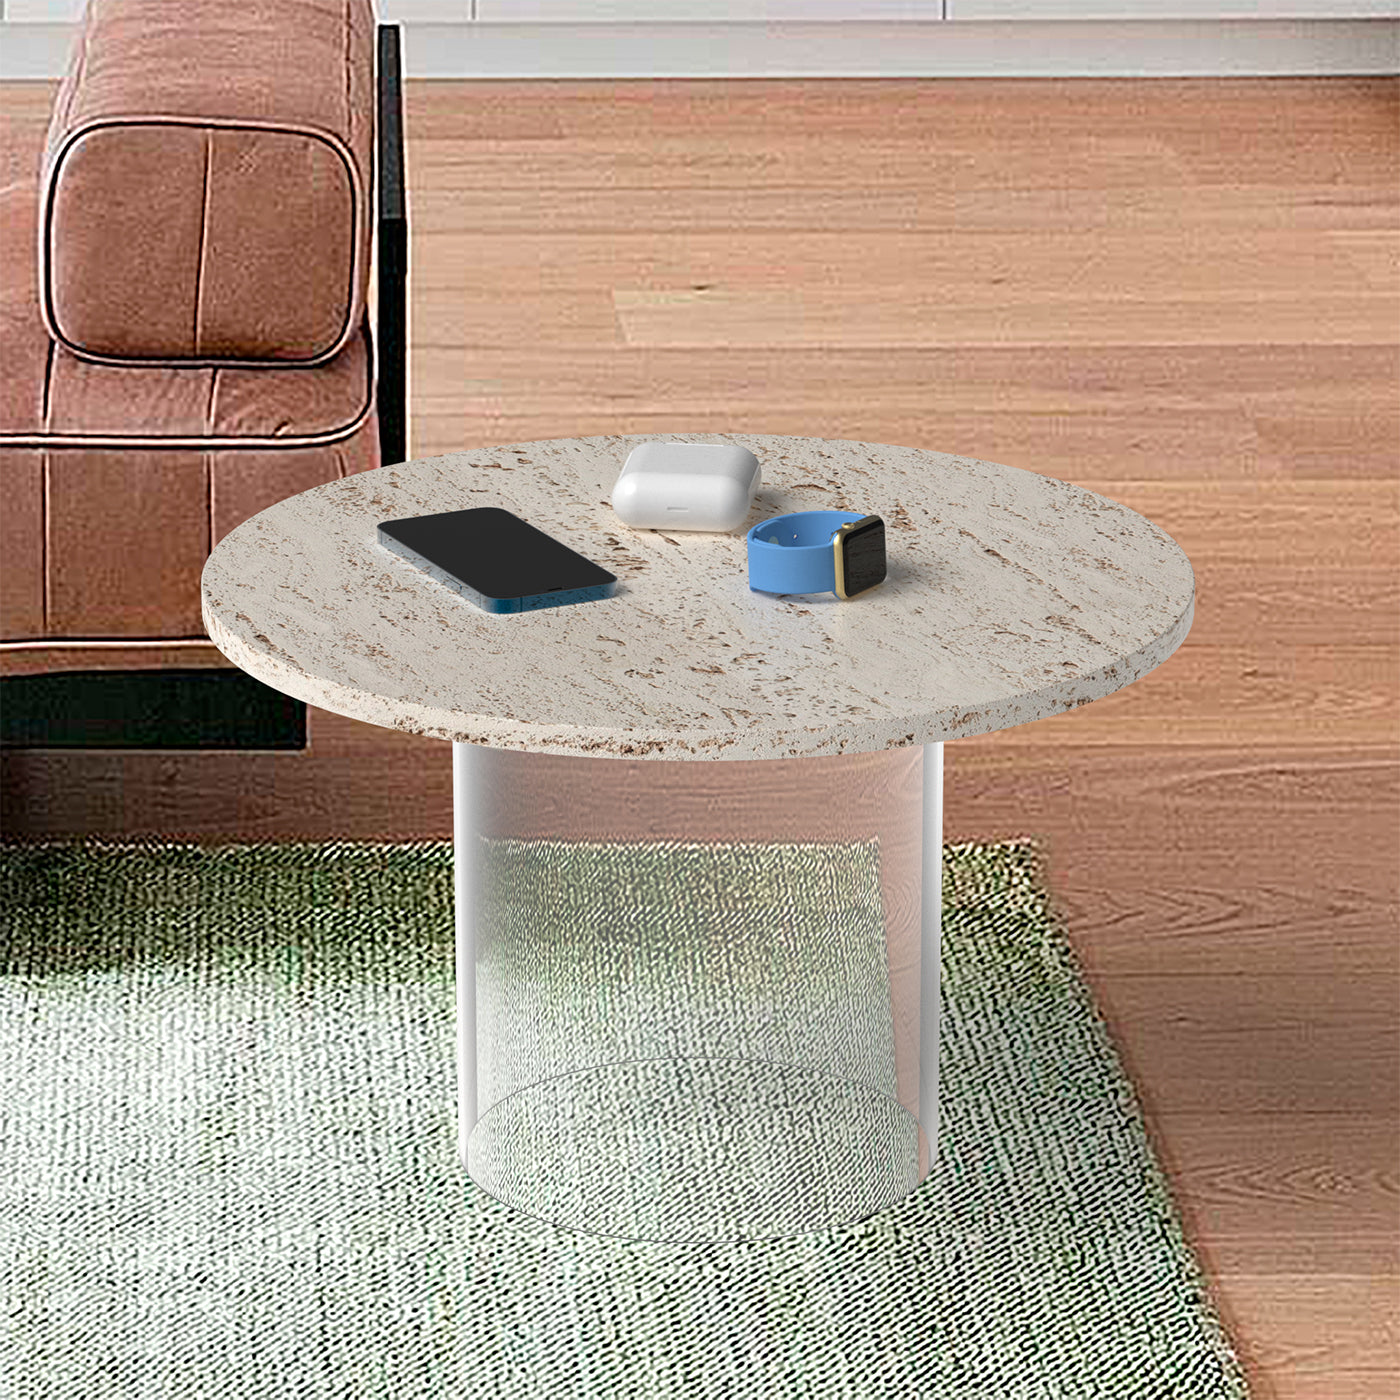 21st Century Travertine Marble Coffee Table with Wireless Charger - Alternative view 3